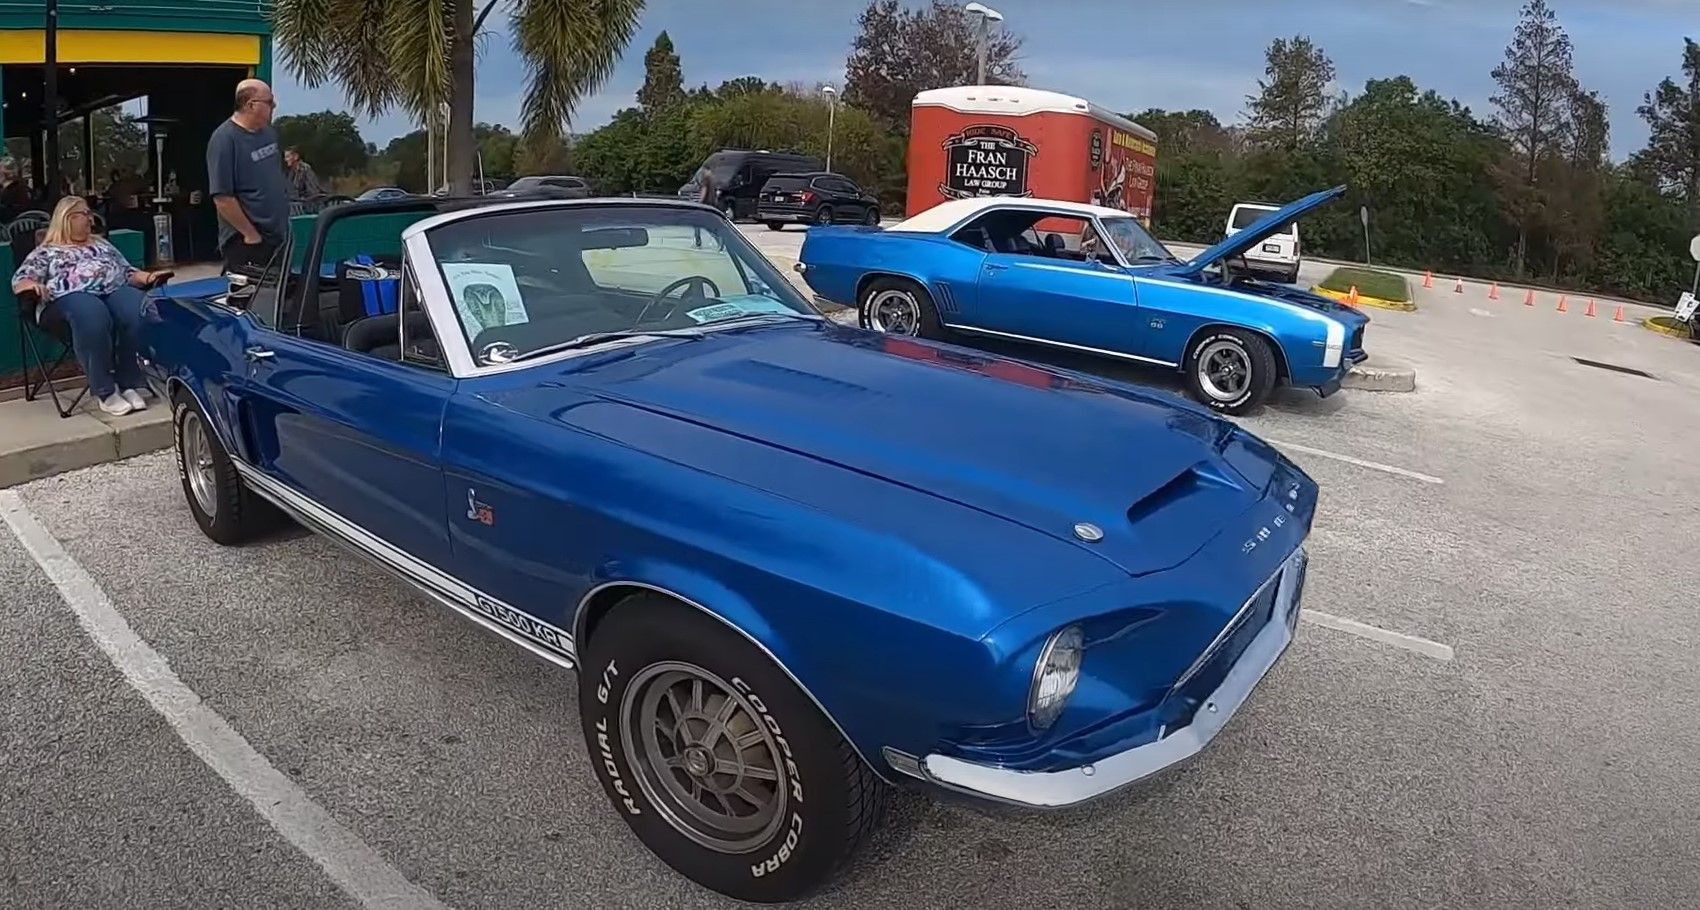 A Rare Shelby Ford Mustang GT500 KR Is A True Stunner At This Florida Classic Car Show